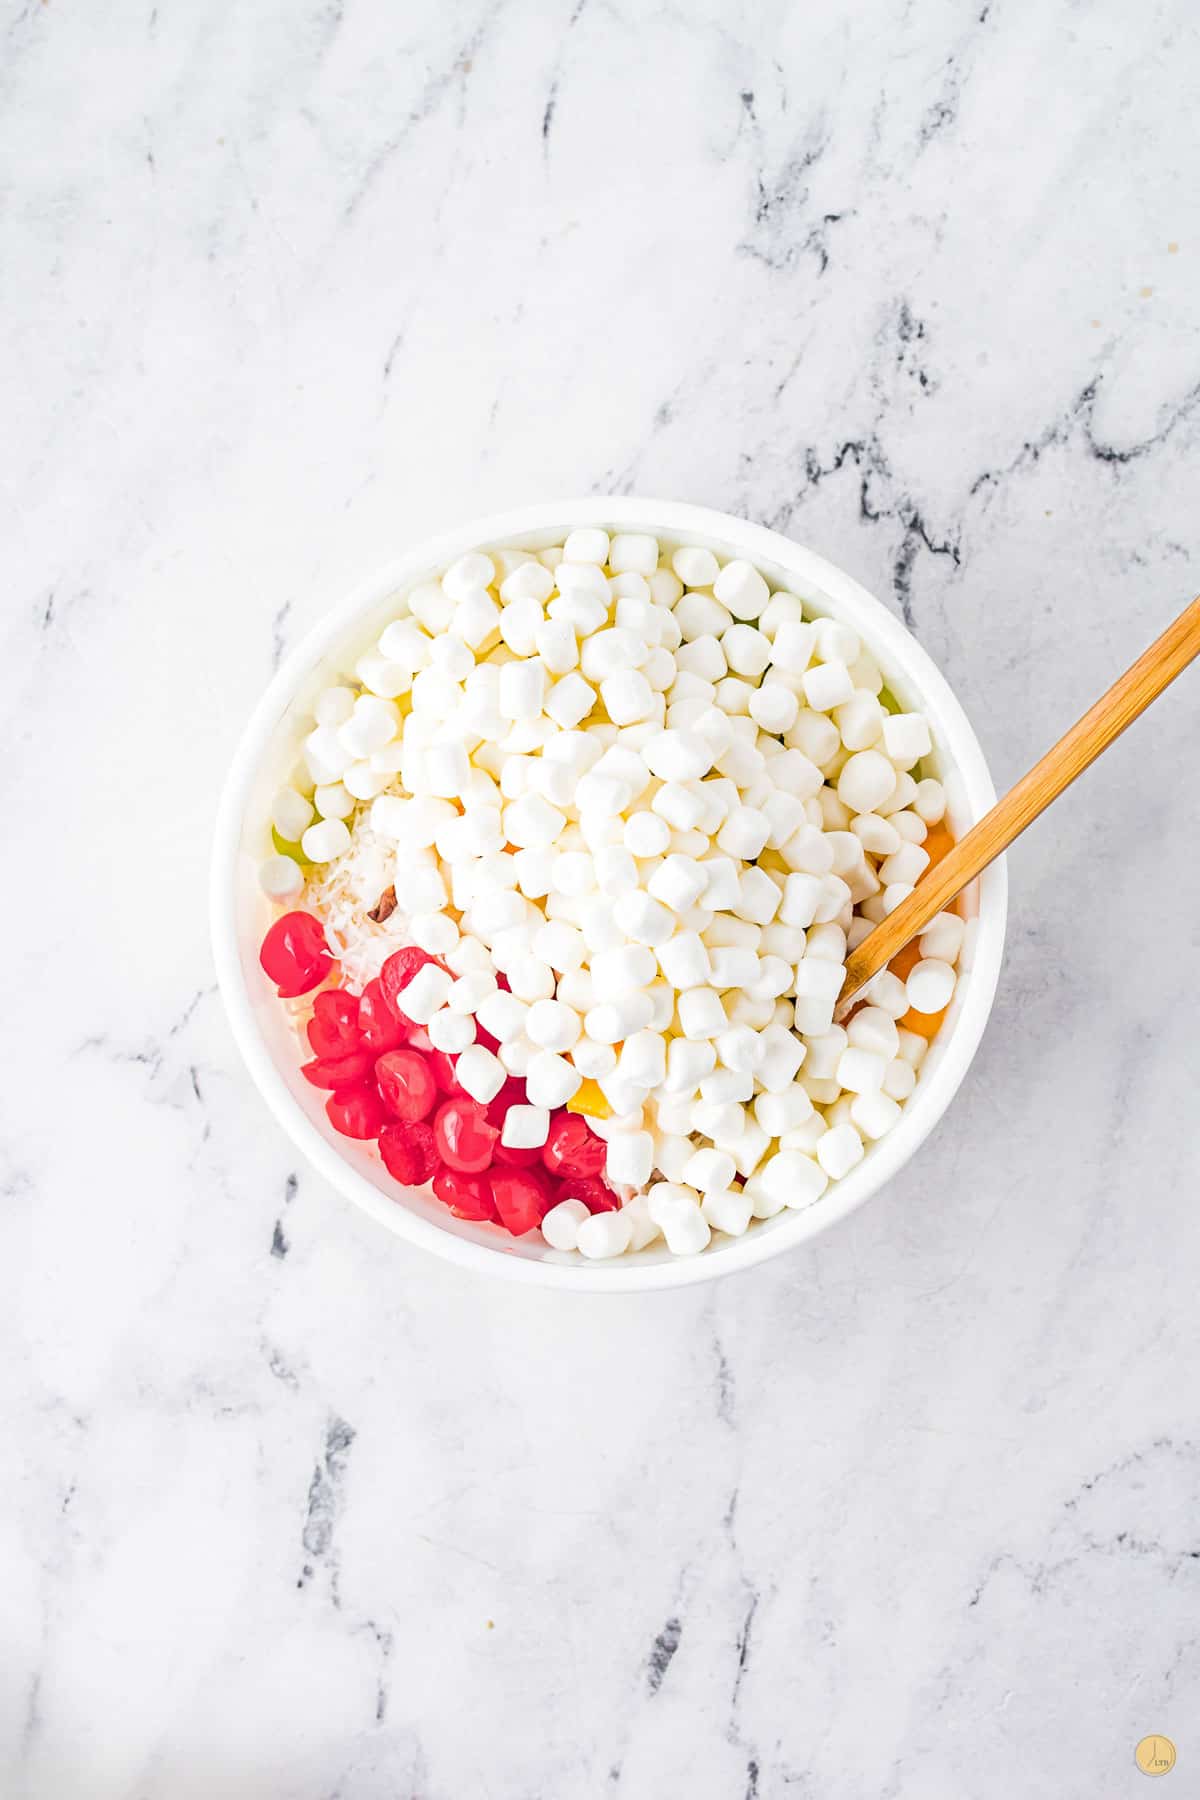 mini marshmallows and cherries in a bowl